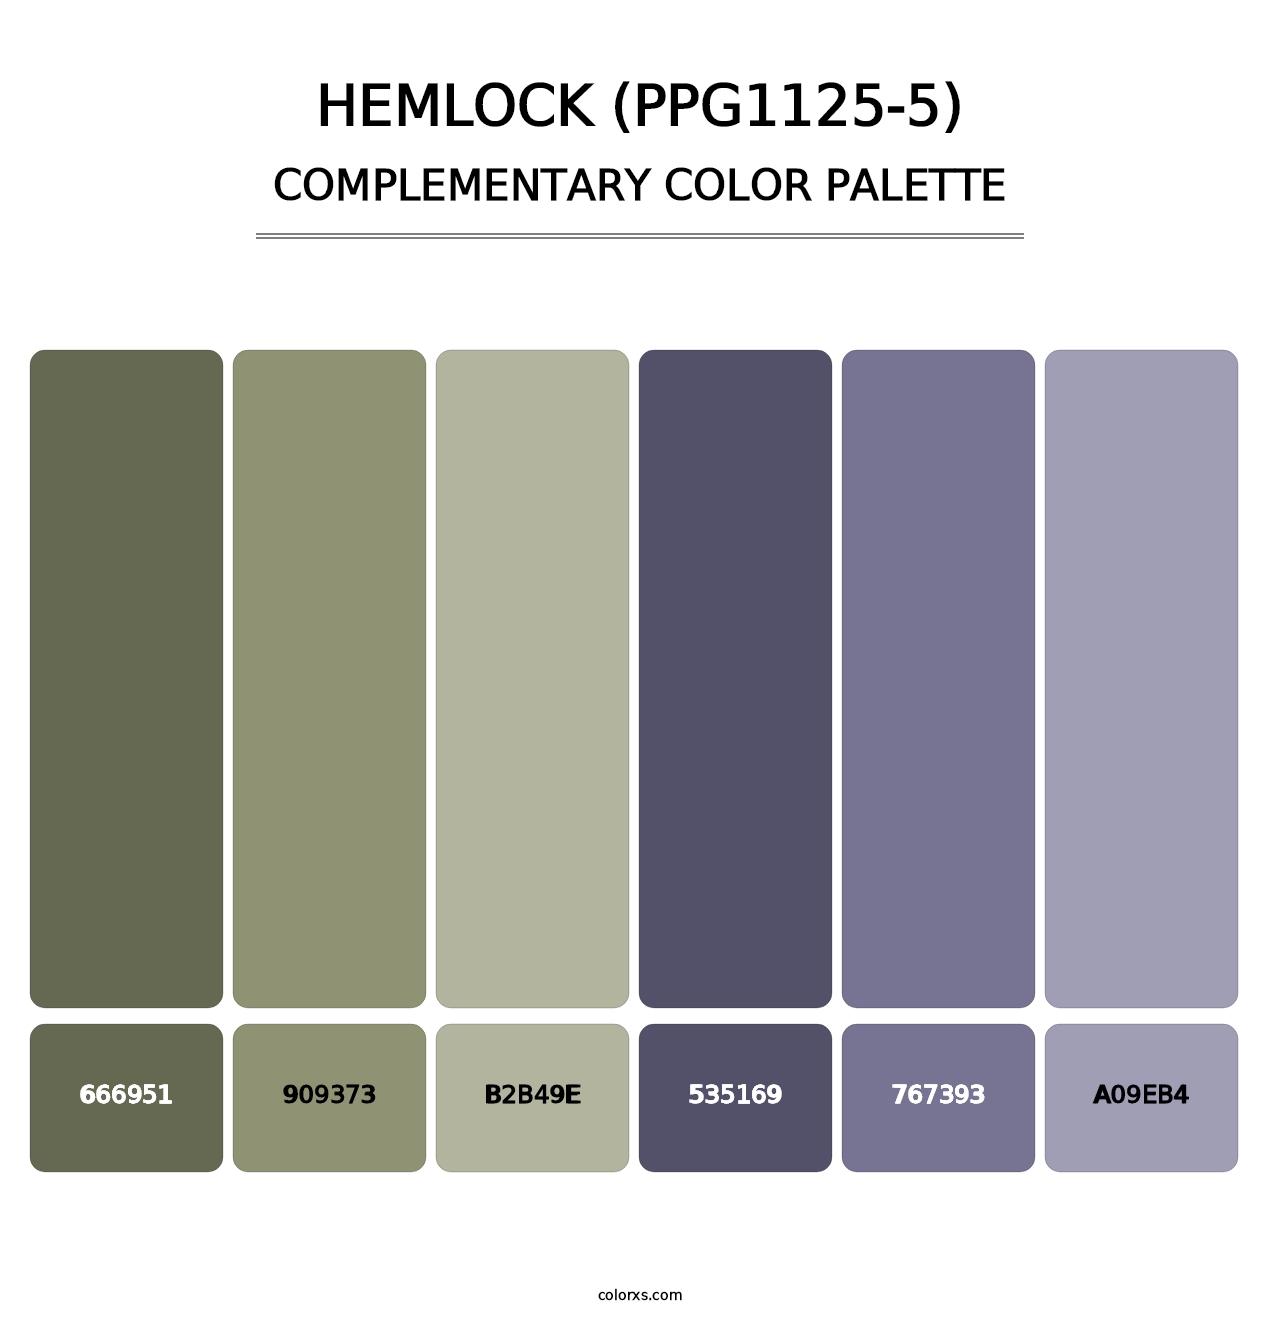 Hemlock (PPG1125-5) - Complementary Color Palette